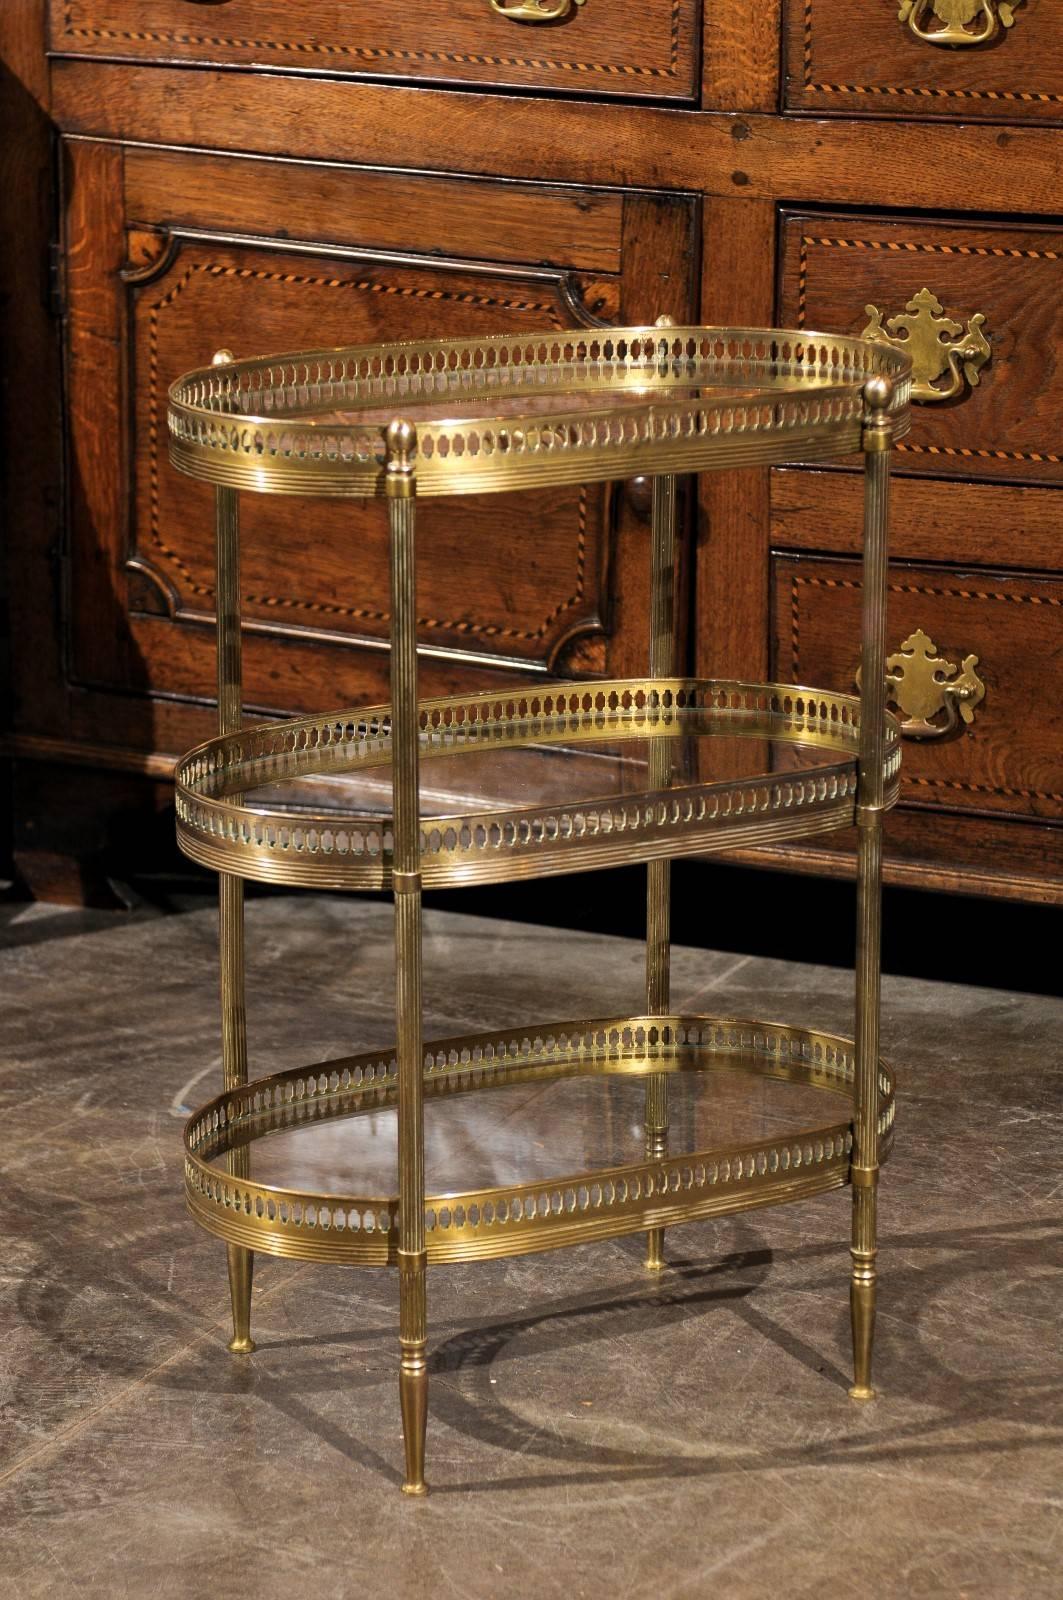 A petite French brass oval table with glass inset shelves from the mid-20th century. This French brass table inspired by the Maison Jansen style features three tiers of clear glass shelves decorated with an oval pierced gallery edging. This small